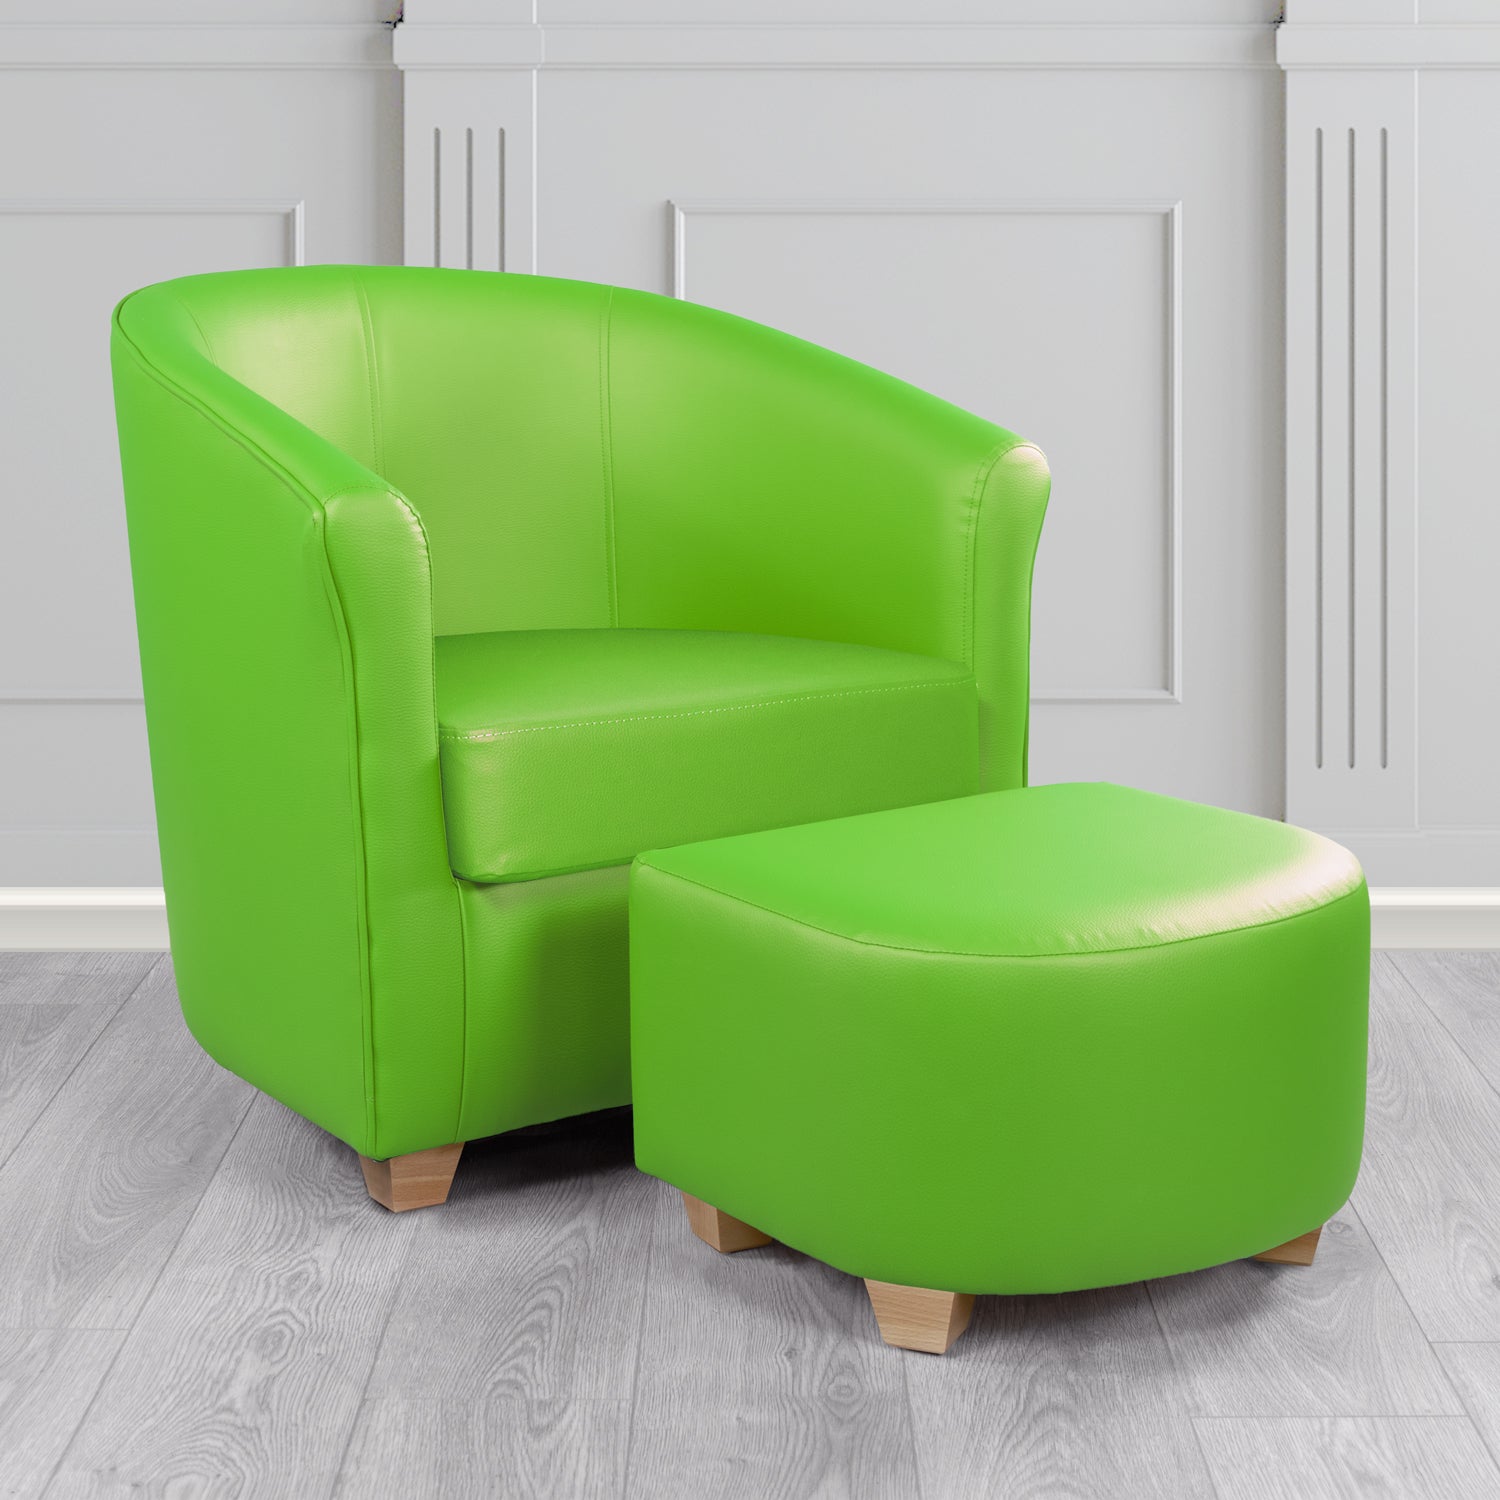 Cannes Tub Chair with Footstool Set in Madrid Lime Faux Leather - The Tub Chair Shop